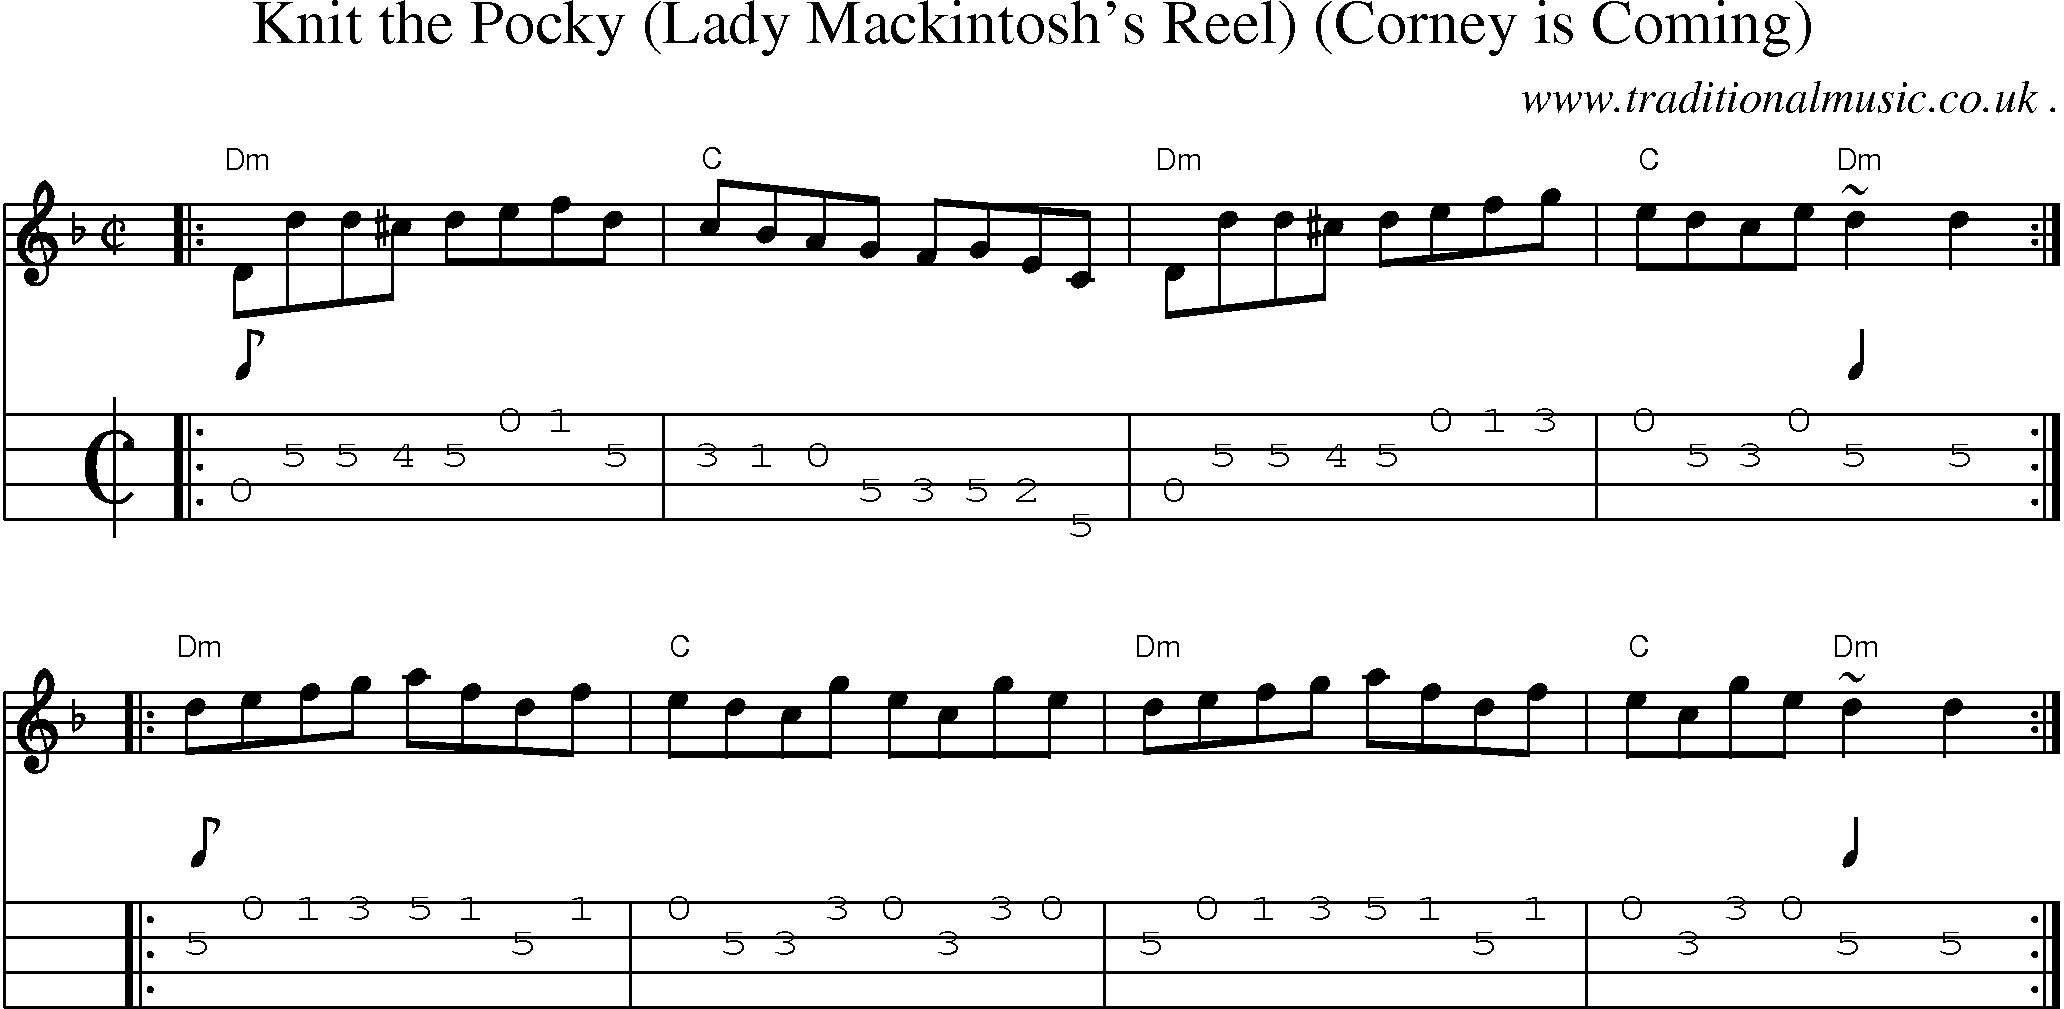 Sheet-music  score, Chords and Mandolin Tabs for Knit The Pocky Lady Mackintoshs Reel Corney Is Coming